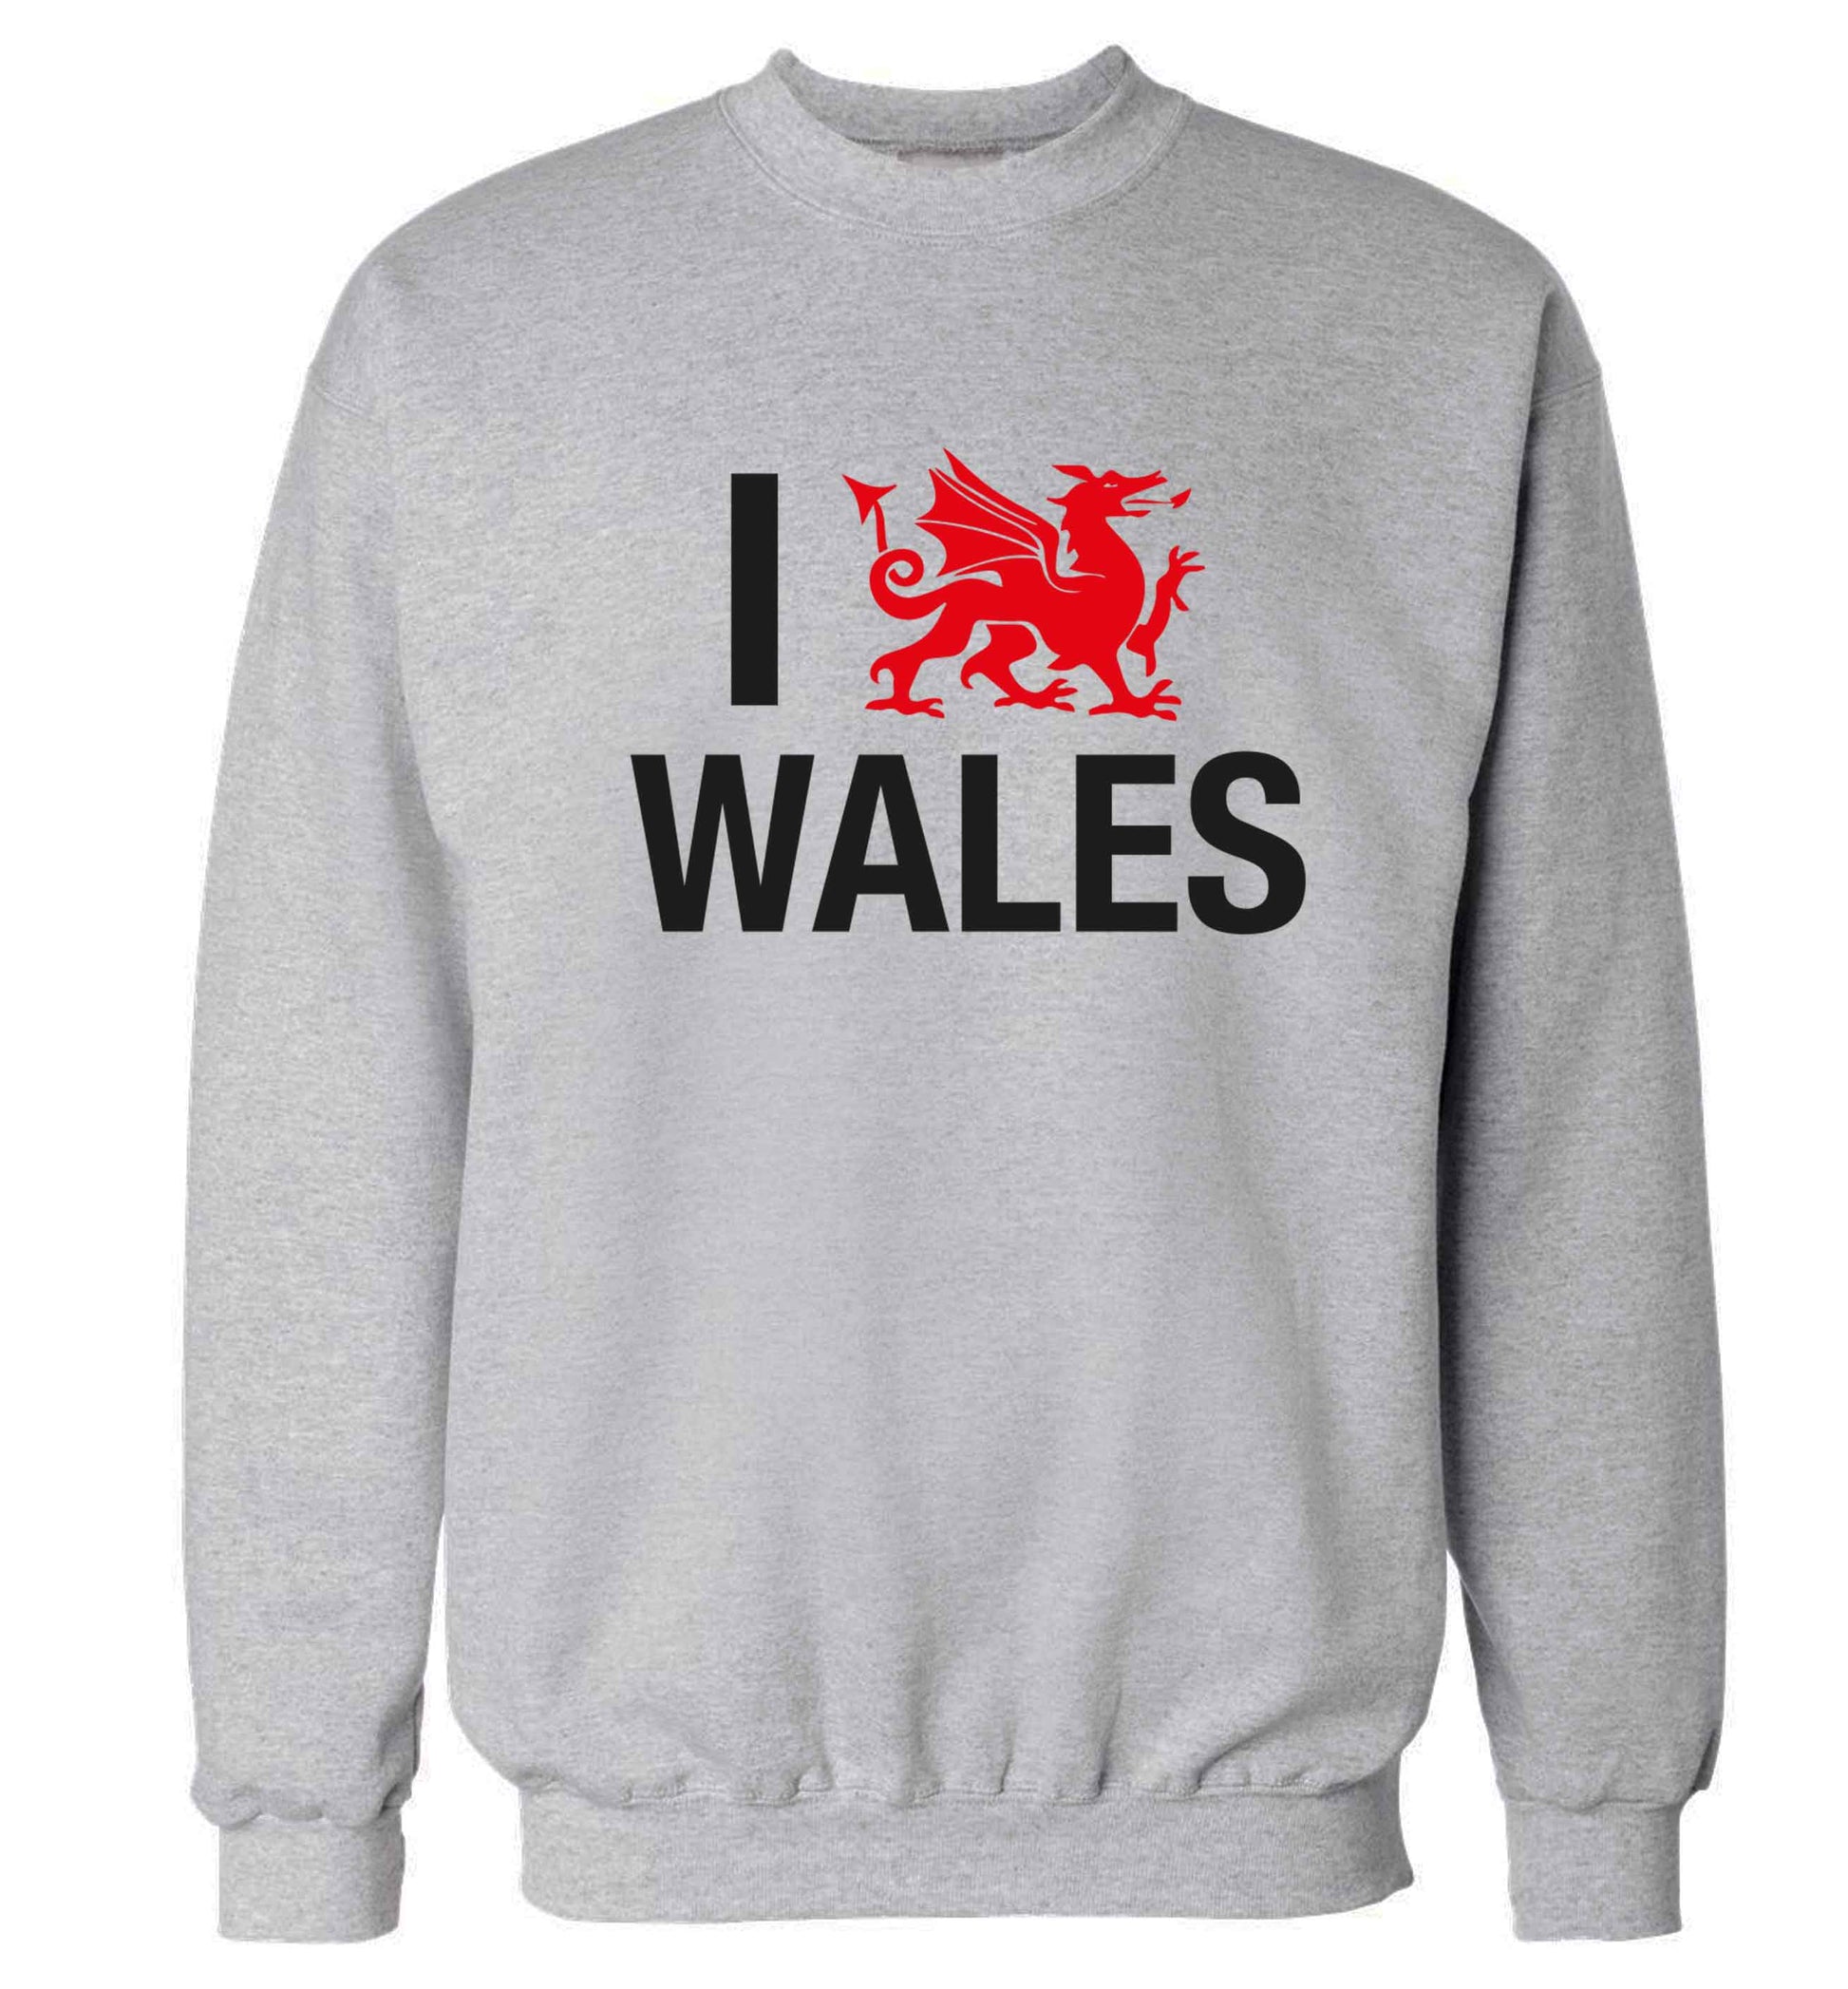 I love Wales Adult's unisex grey Sweater 2XL